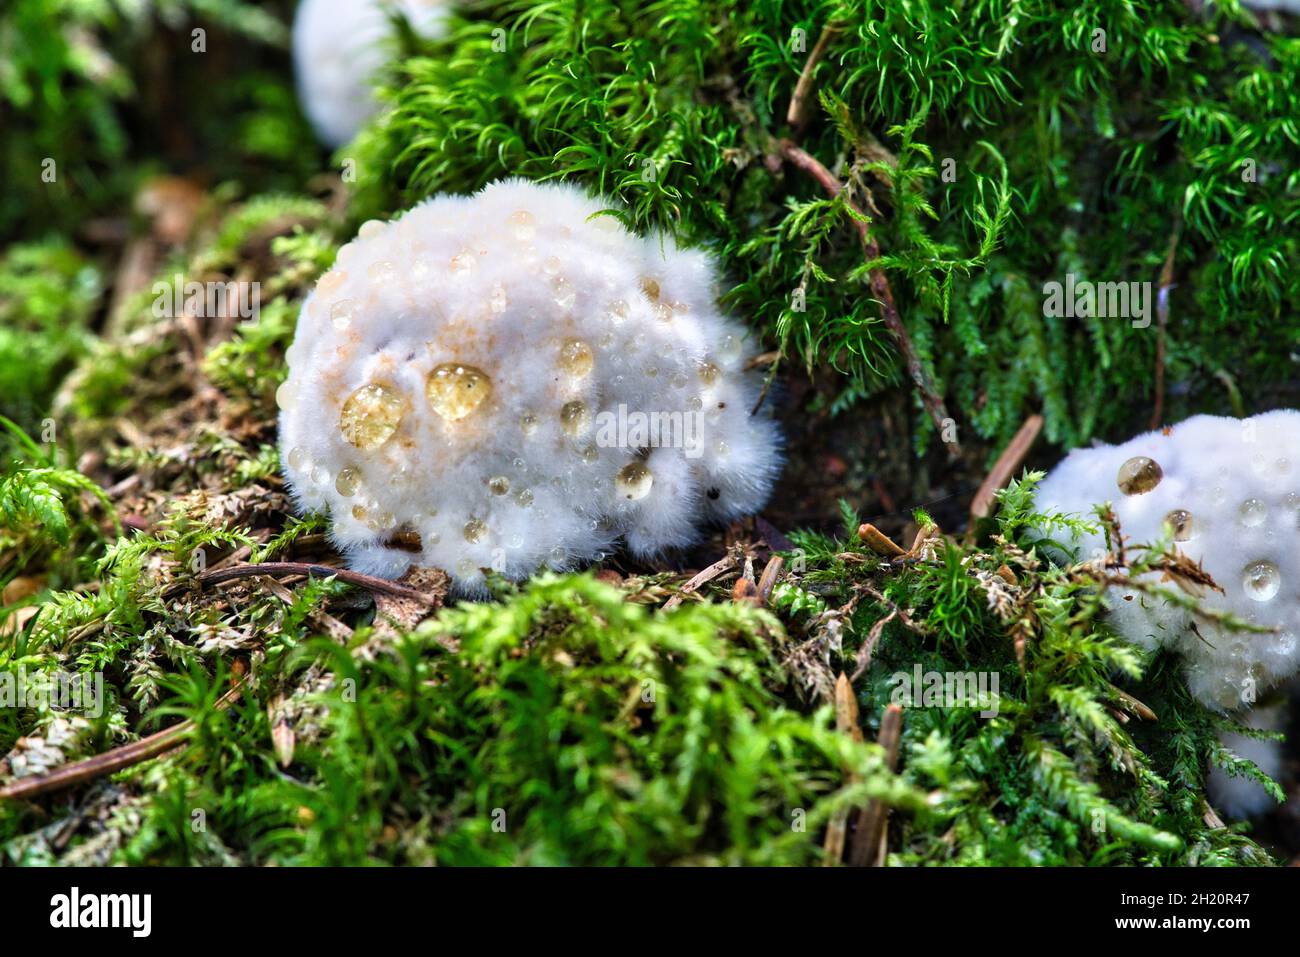 Postia ptychogaster, known as the powderpuff bracket, strange fungus from Sweden Stock Photo